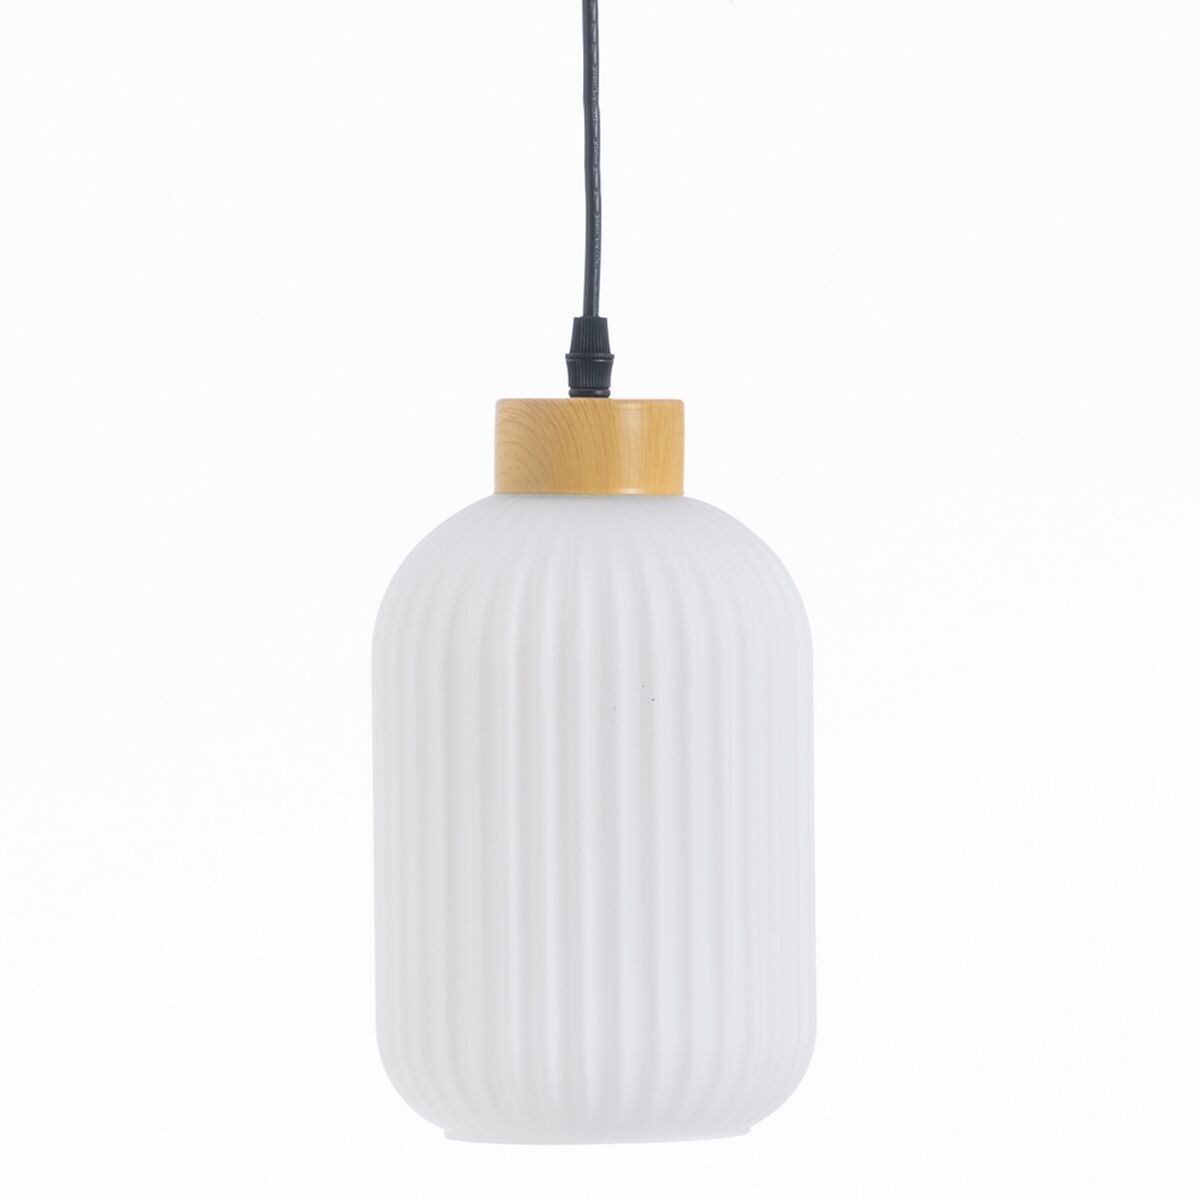 White Ceiling Light with Wooden Style Detail (14 x 14 x 32 cm)